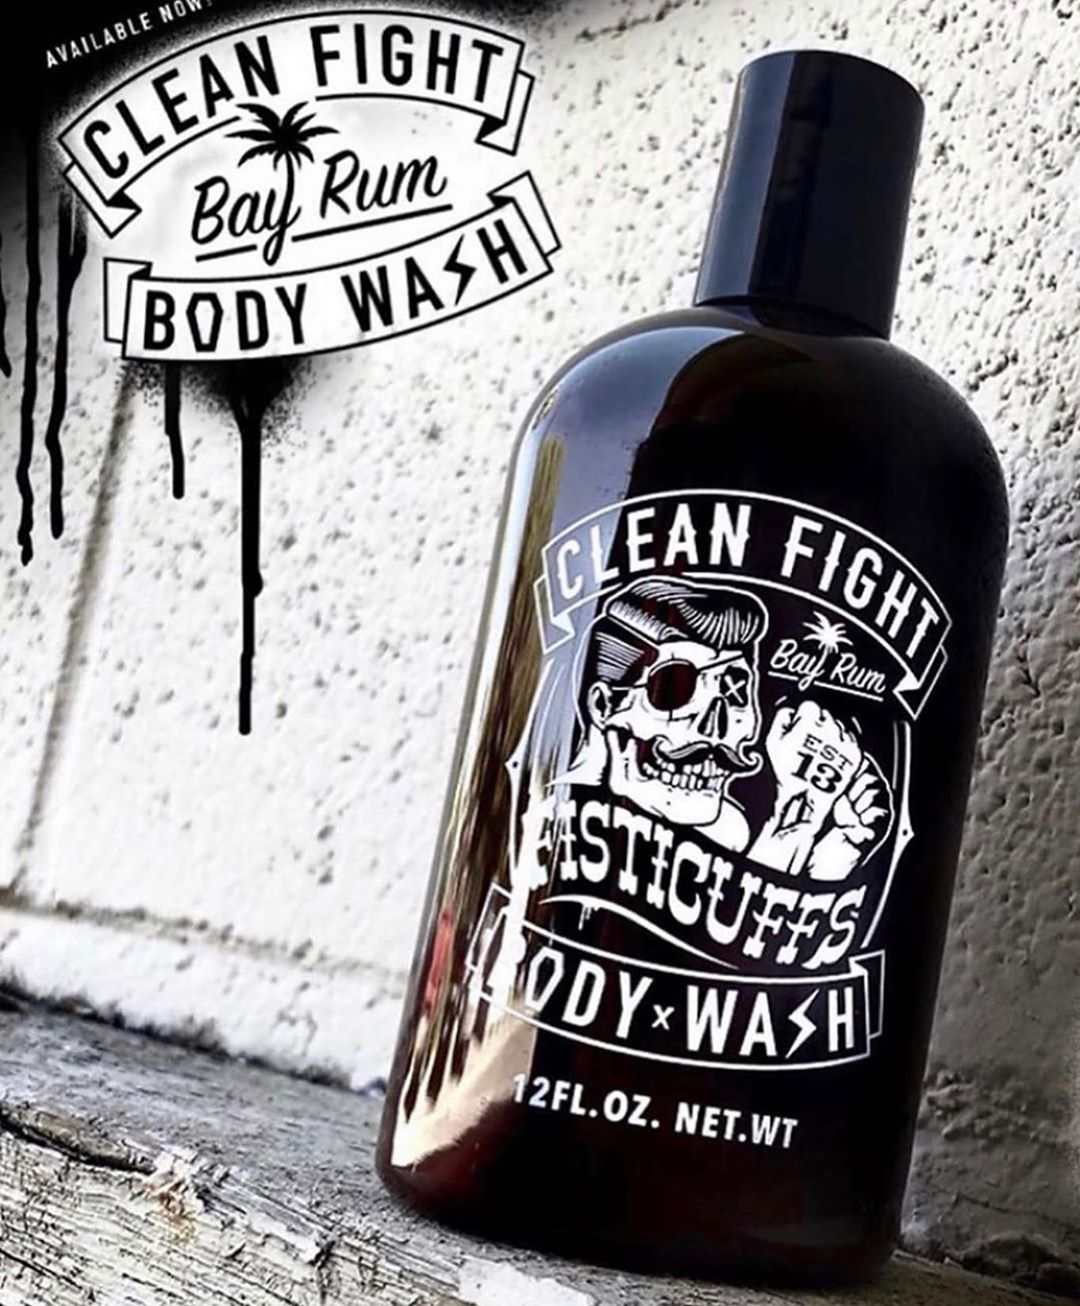 wayne bailey - FISTICUFFS Clean Fight BODY WASH with our Bay Rum scent!

WWW.GRAVEBEFORESHAVE.COM 
This Body Wash is AMAZING!! Ultra hydrating formula enriched with Jojoba and Argan Oils! -12 oz. Larg...